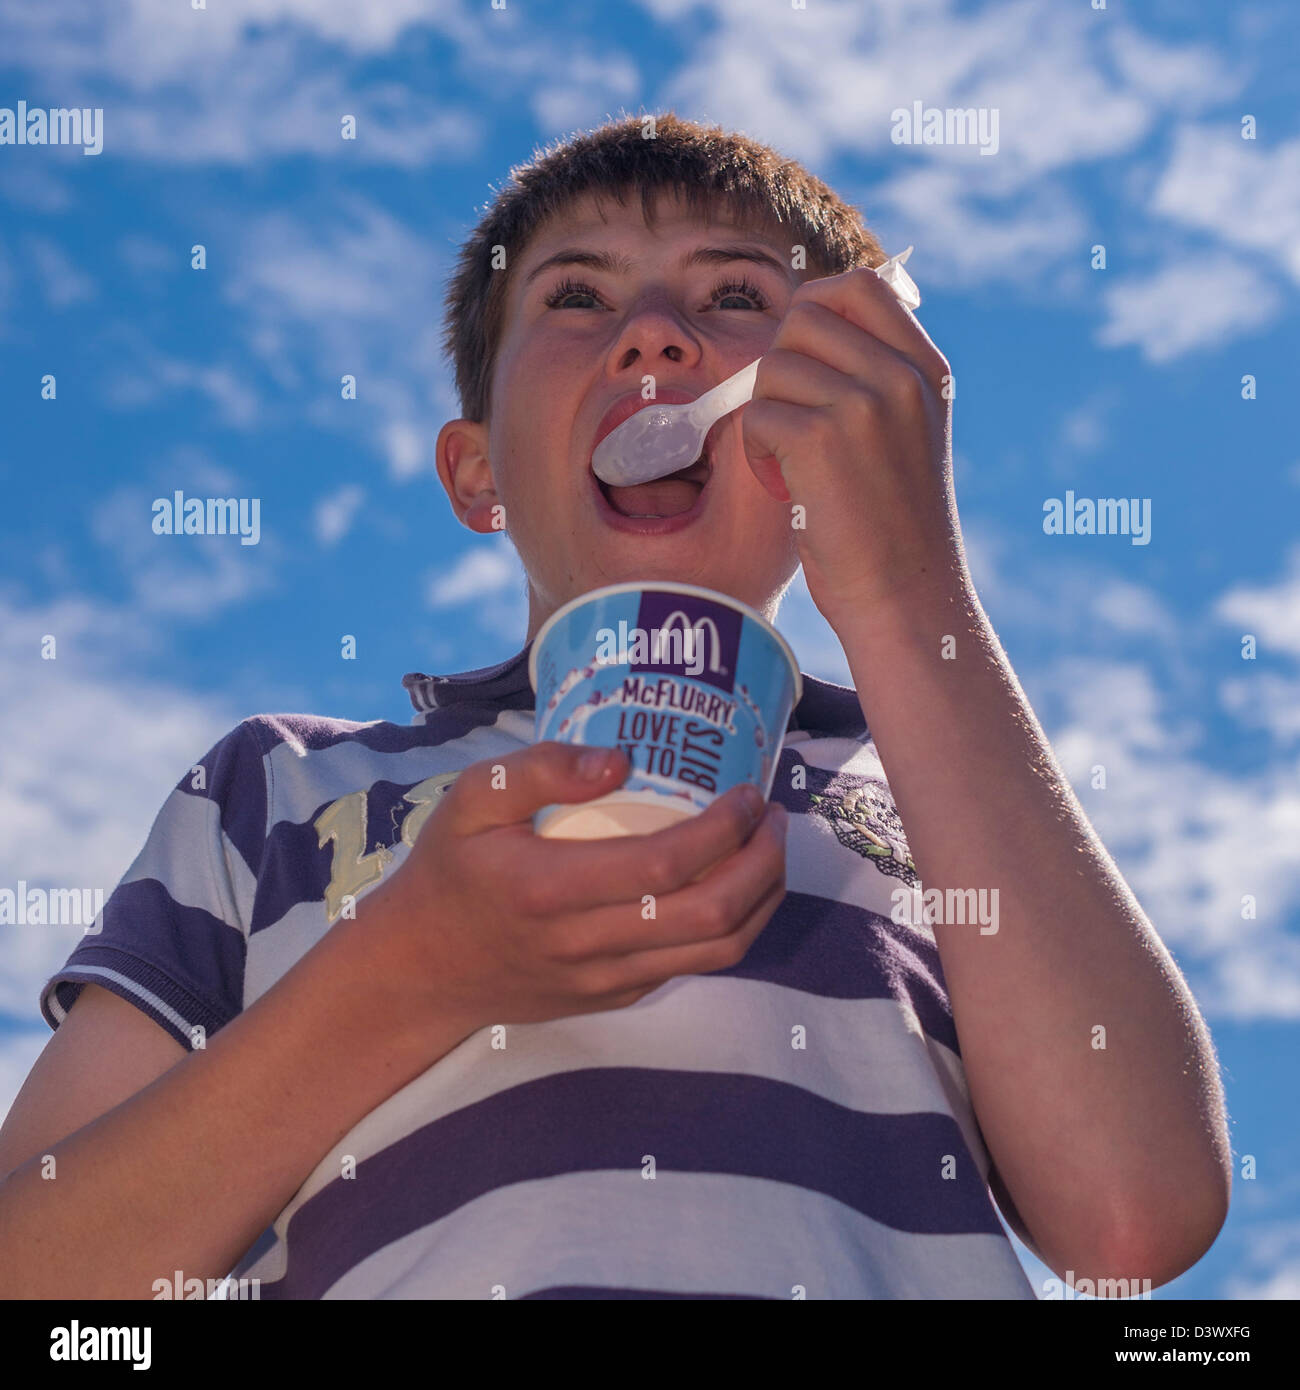 A 12 year old boy eating a mcdonalds Mcflurry ice cream outdoors in the uk Stock Photo